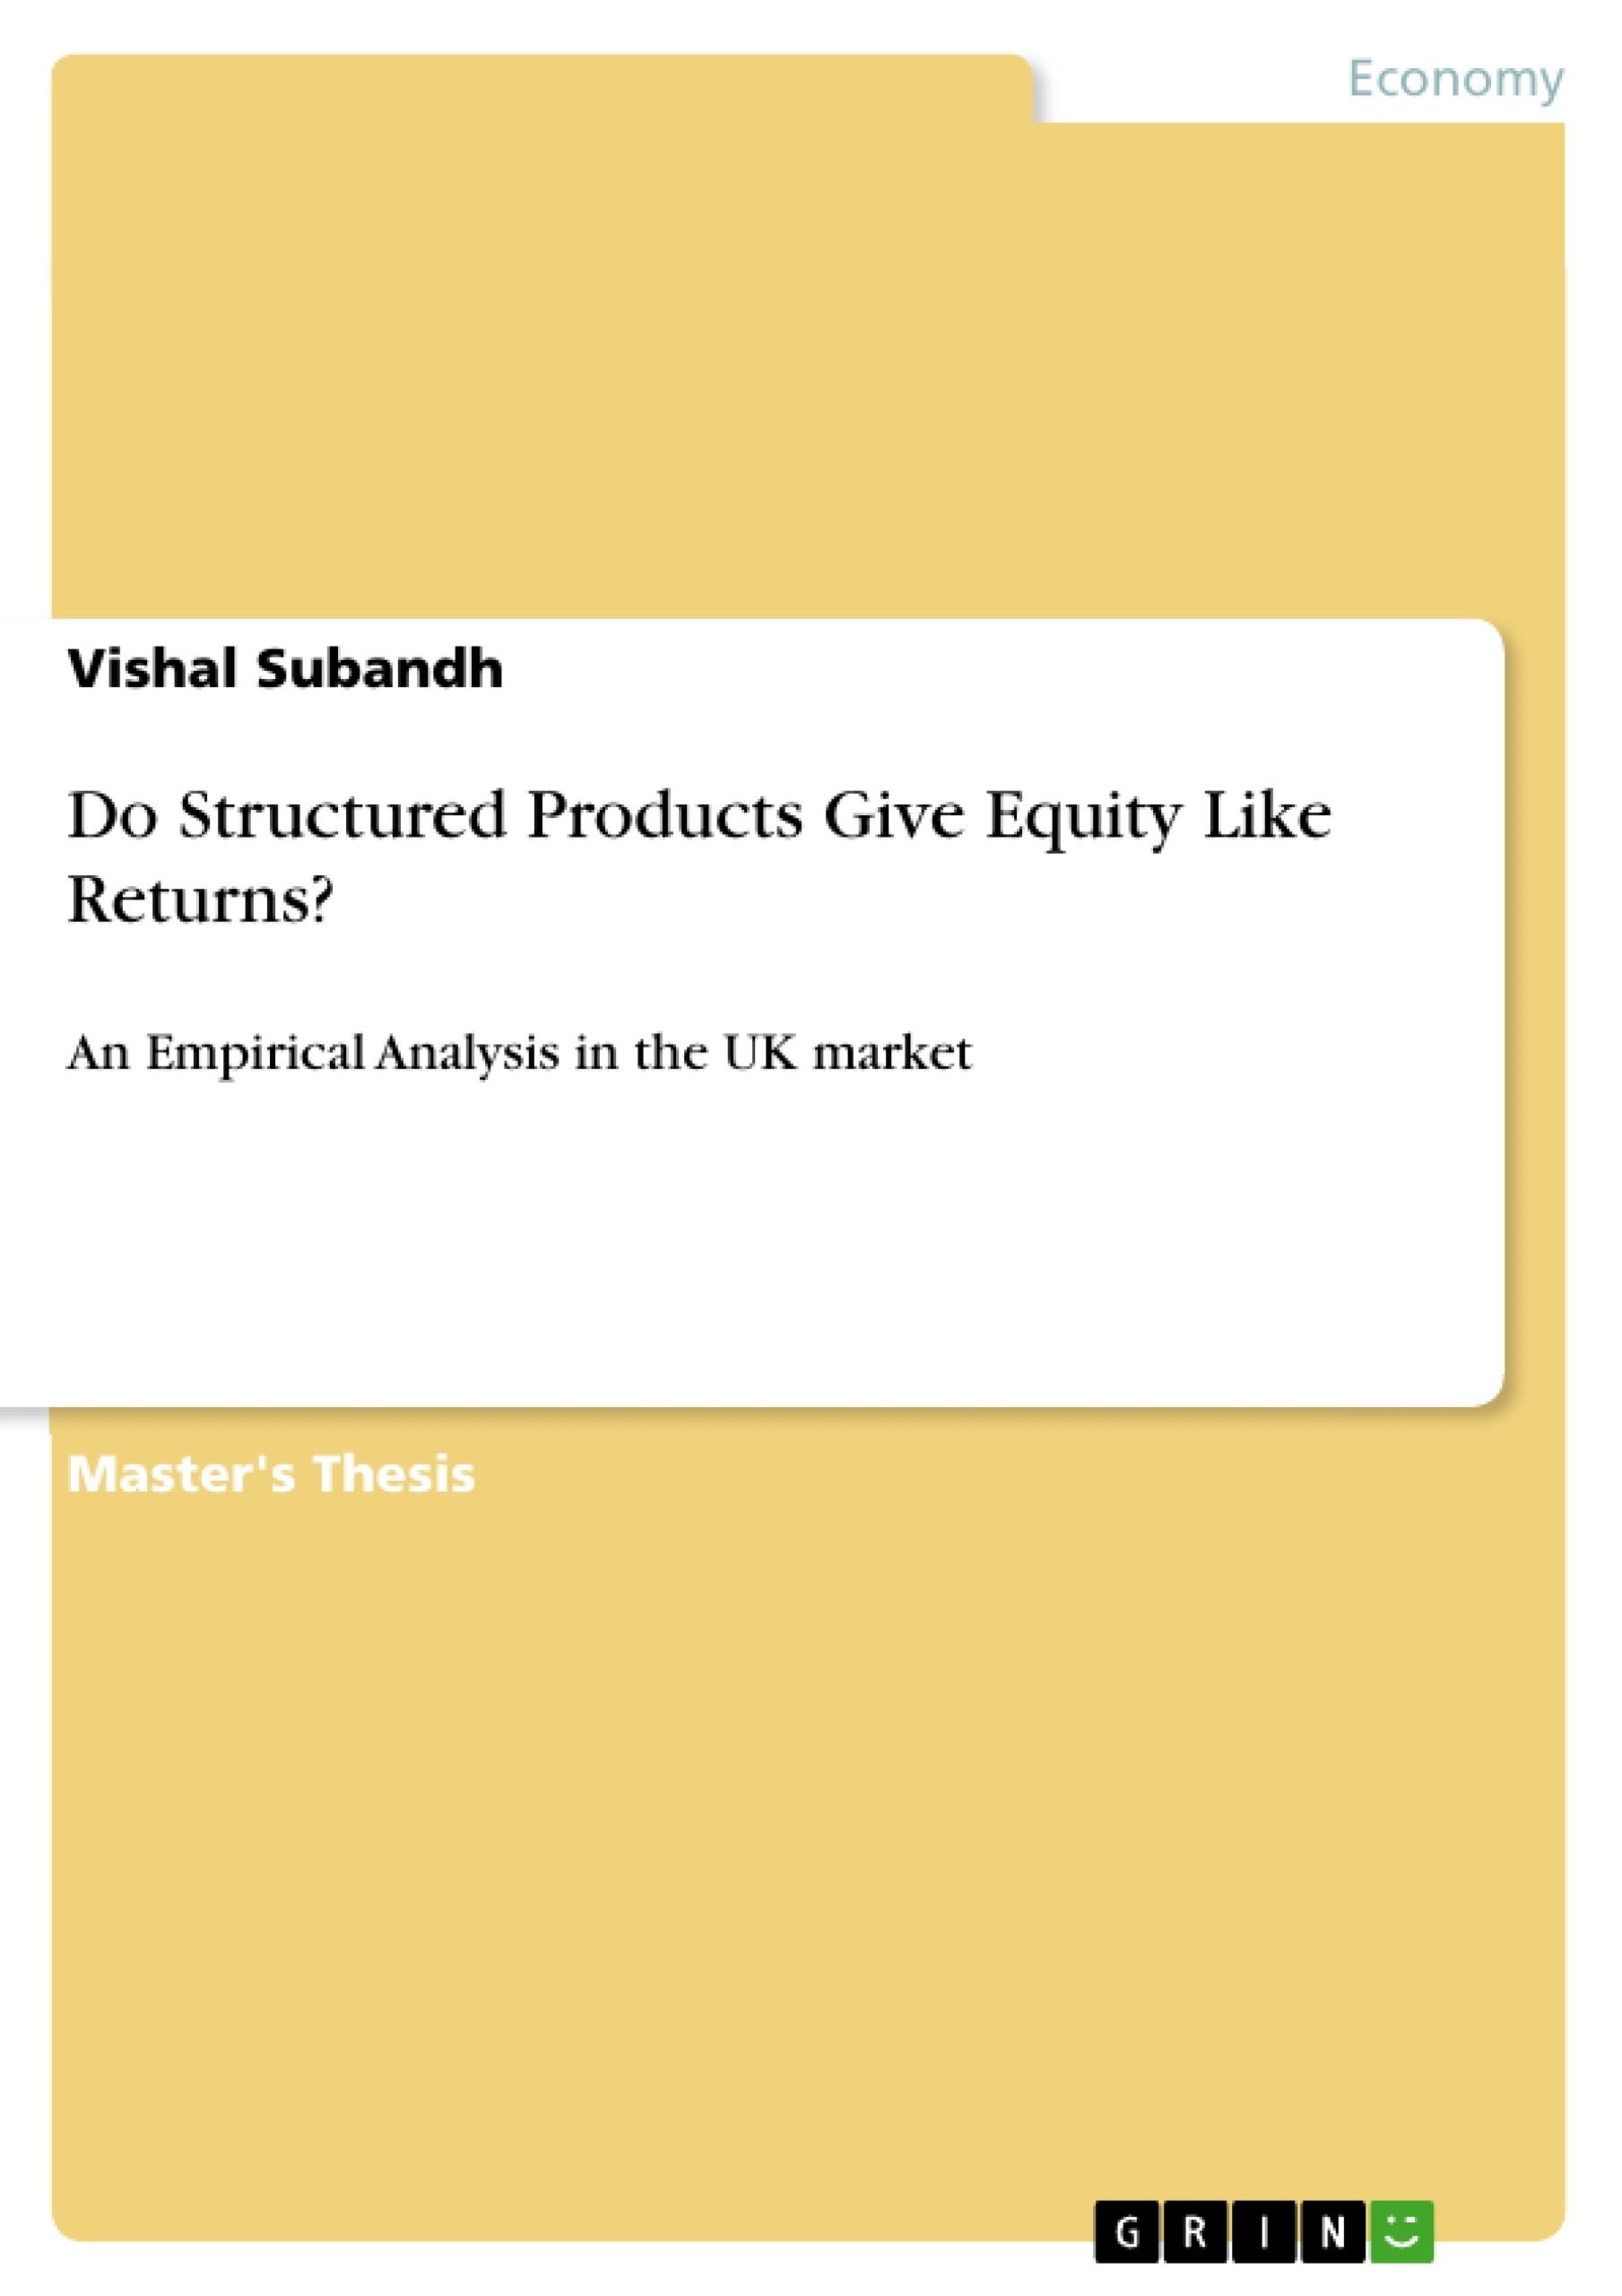 Título: Do Structured Products Give Equity Like Returns?